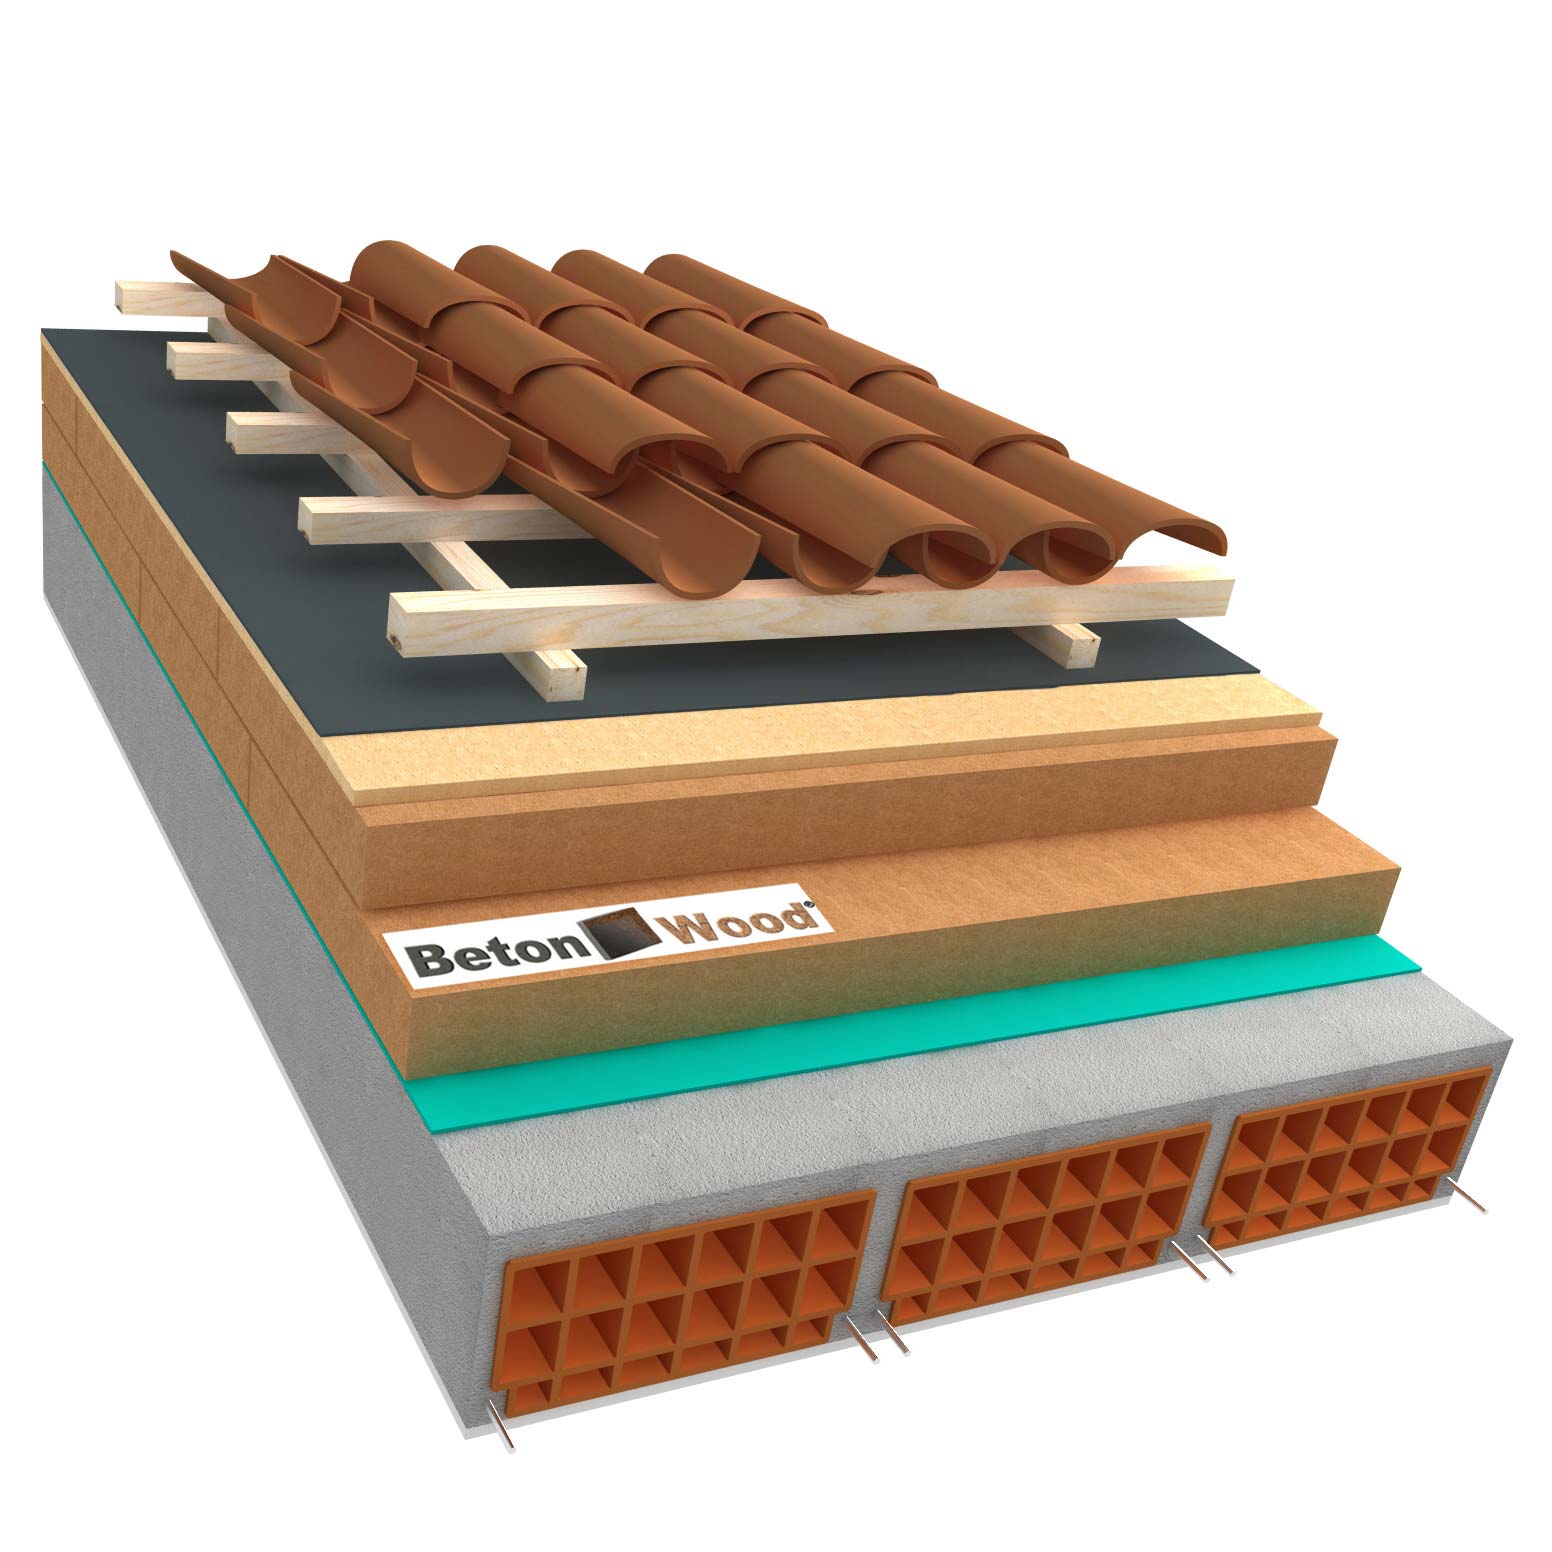 Ventilated roof with fiber wood Isorel and Therm on concrete